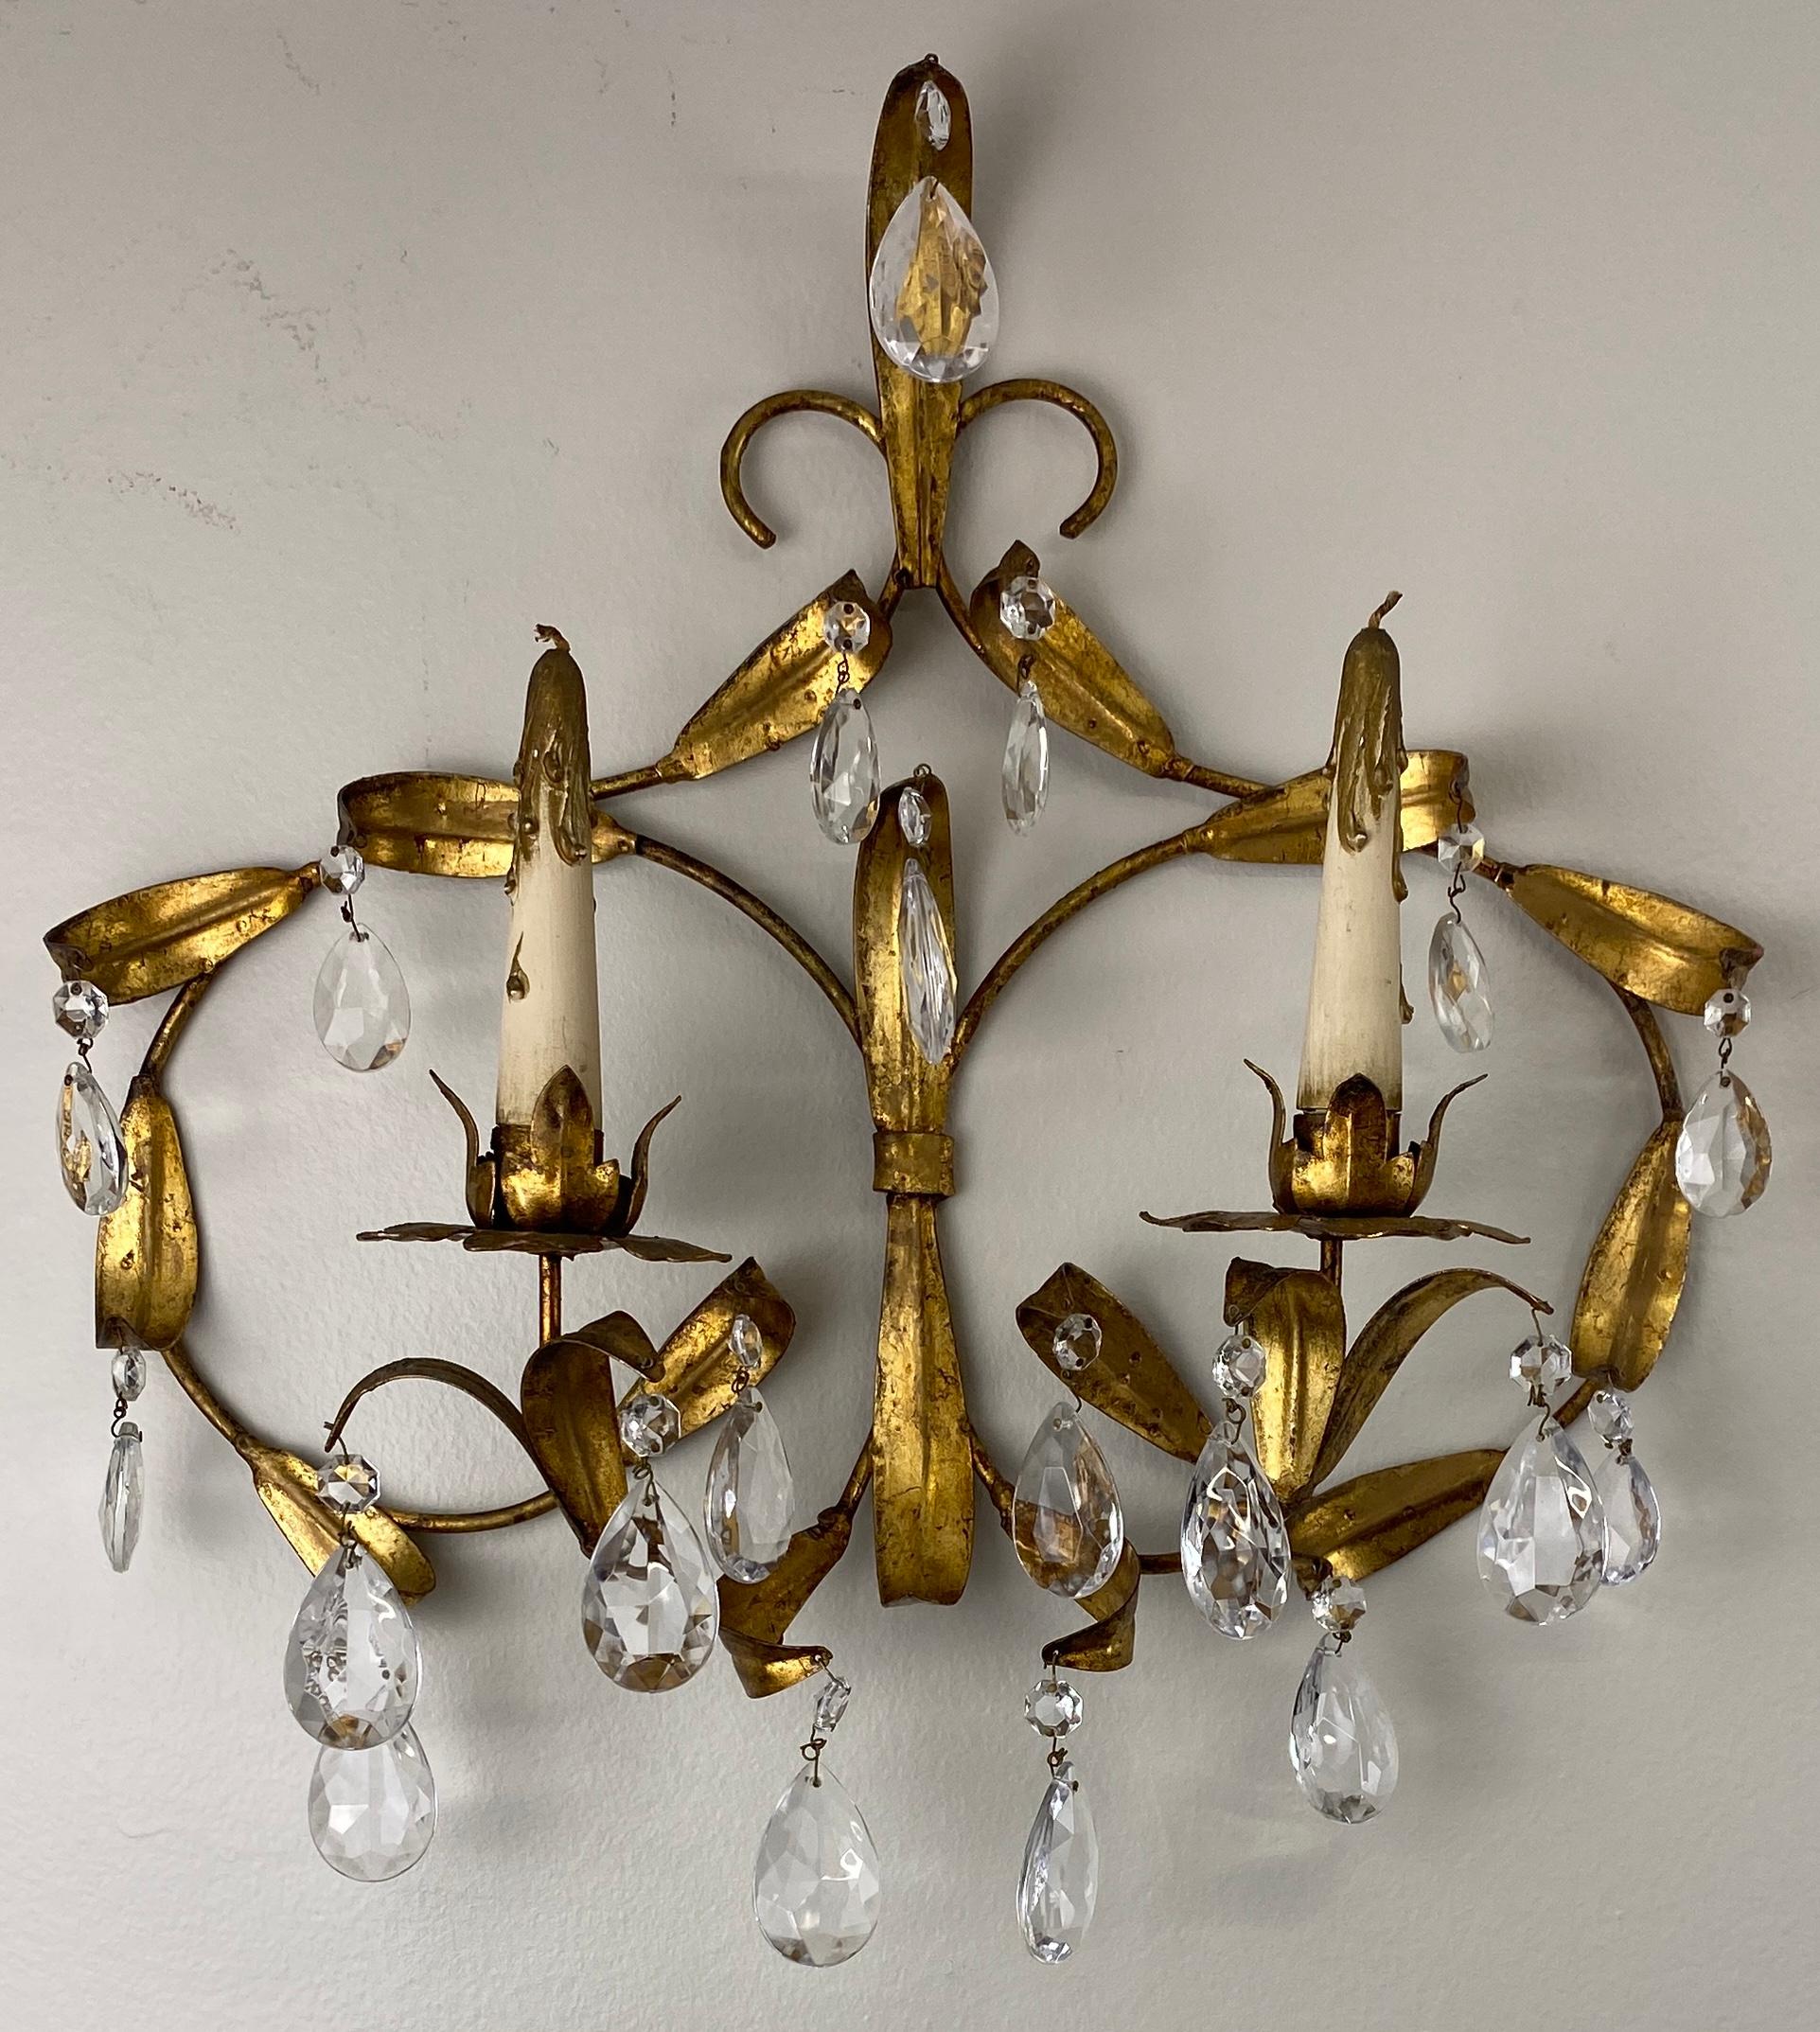 Pair of Maison Baguès Mid-20th Century Gilt Metal and Crystal Wall Sconces For Sale 4